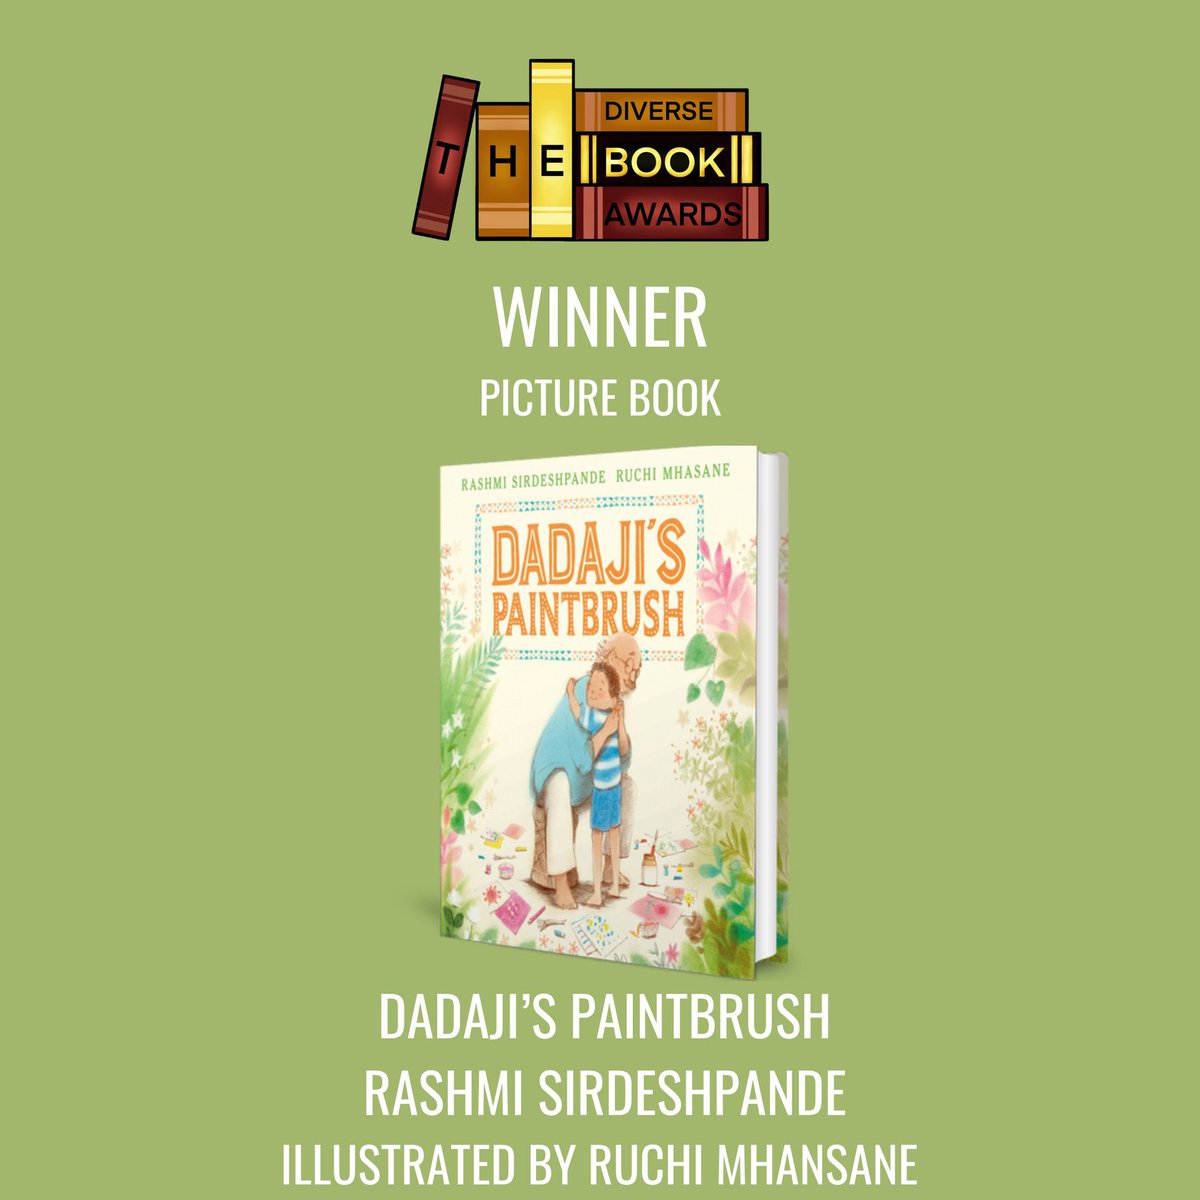 WE WON! 😭 So shocked and grateful and just so happy. Very proud of the book we made together, @ruchimhasane and @AndersenPress. It’s the book that my agent @LydiaRSilver fell in love with too. #DiverseBookAwards #TheDBAwards